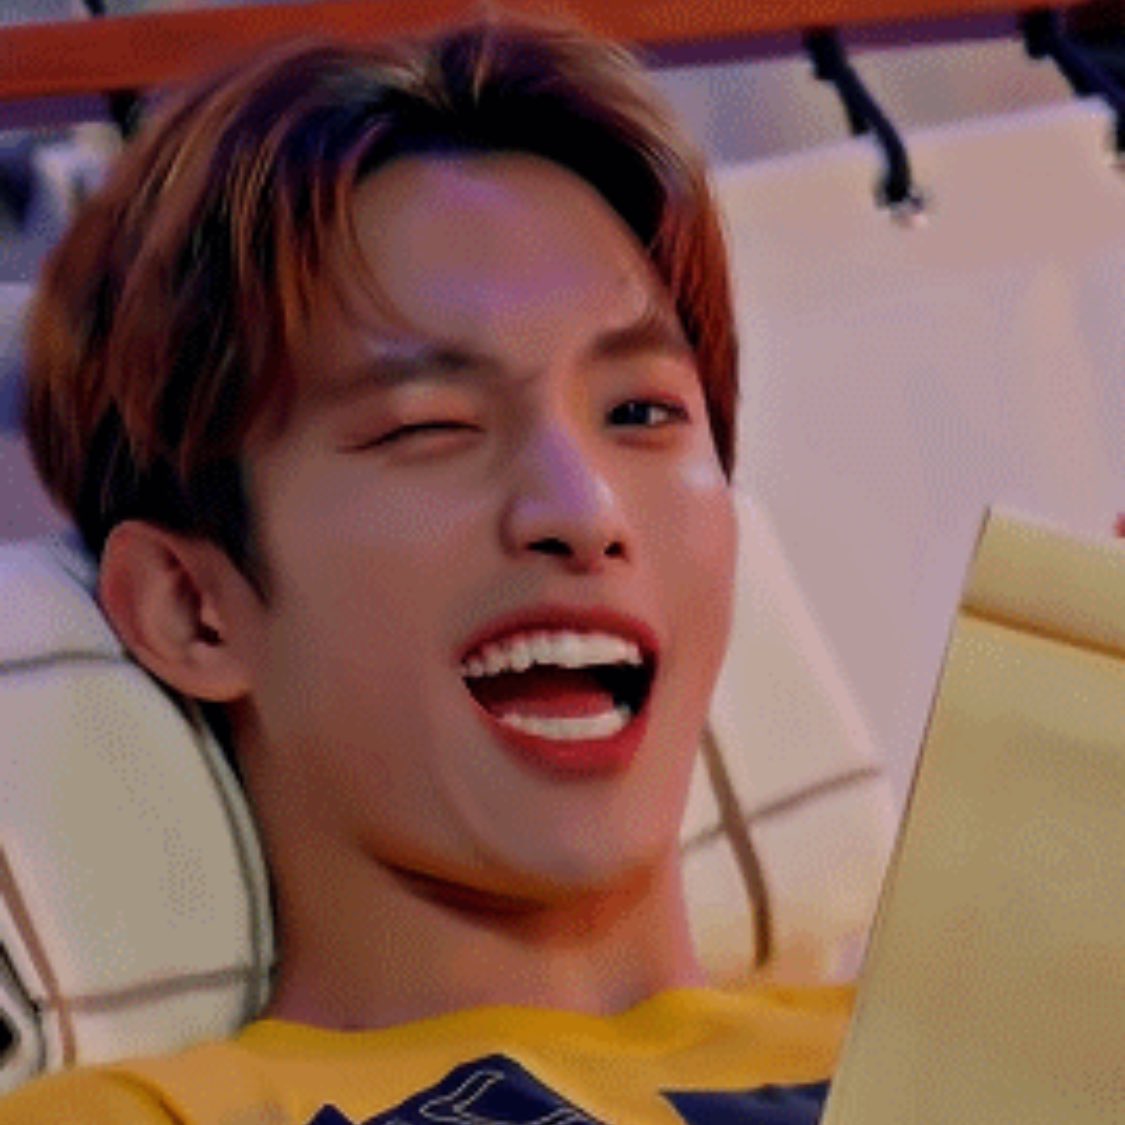 seokmin ; yellow— the colour of the sun, smileys and sunflowers. signifying youthfulness, hope, positivity, fulfilment, courage, self-confidence, wisdom and happiness.